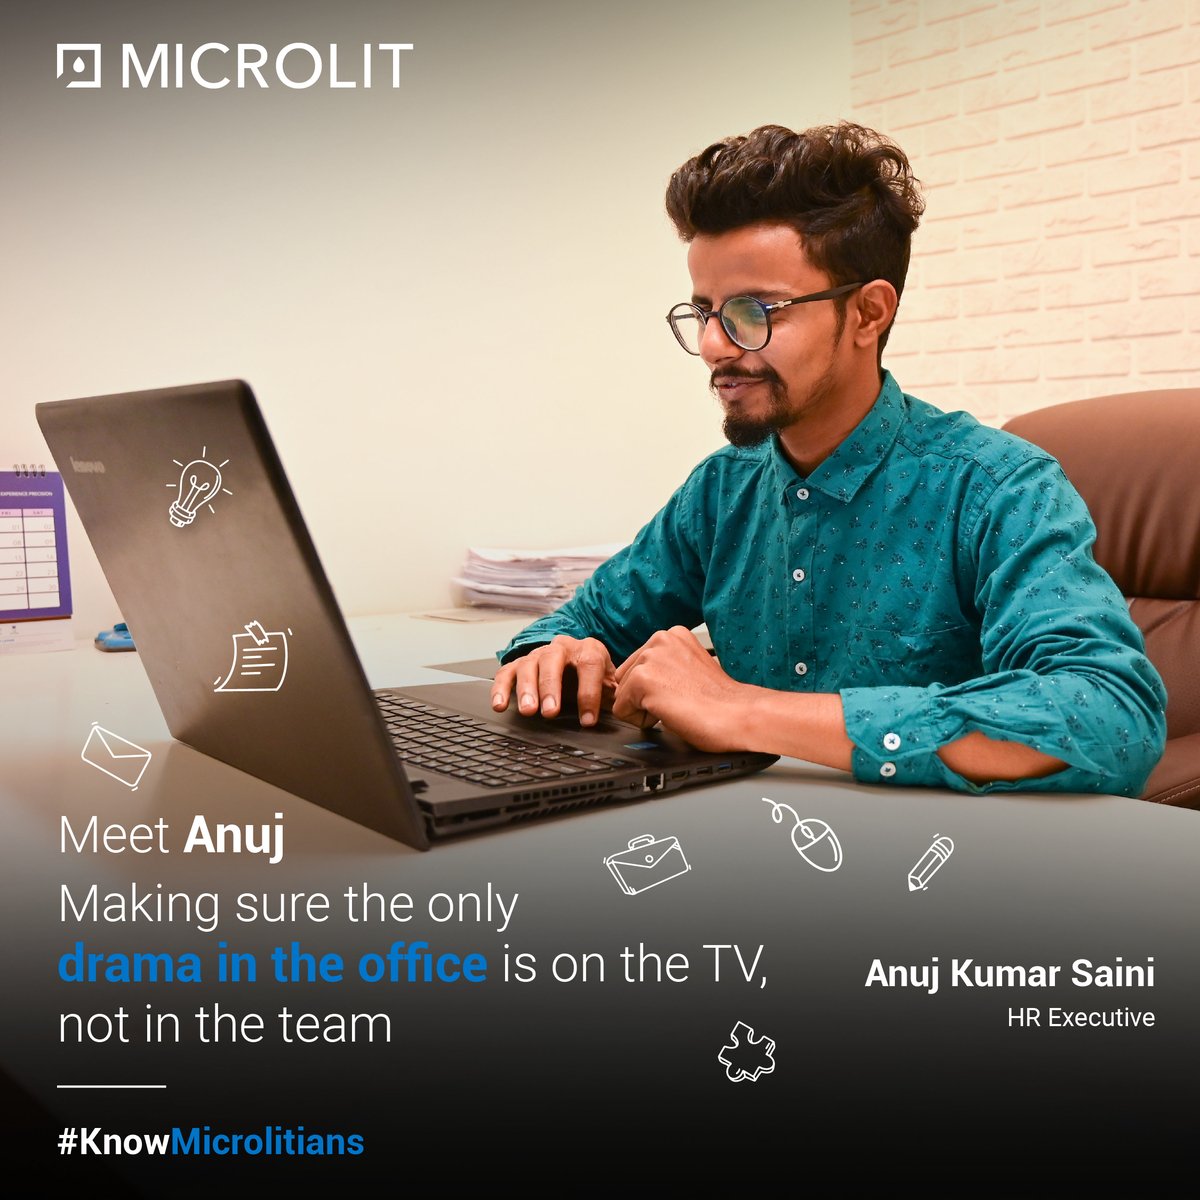 Anujkumar Saini, our HR maestro, is here to ensure the office vibe is more sitcom than soap opera.

Lights, camera, professional action! 🌐🎥

#Microlit #KnowMicrolitians #EmployeeSpotlight #EmployeeTestimonial #HRManager #HumanResources #ExperiencePrecision #EnablingInnovations